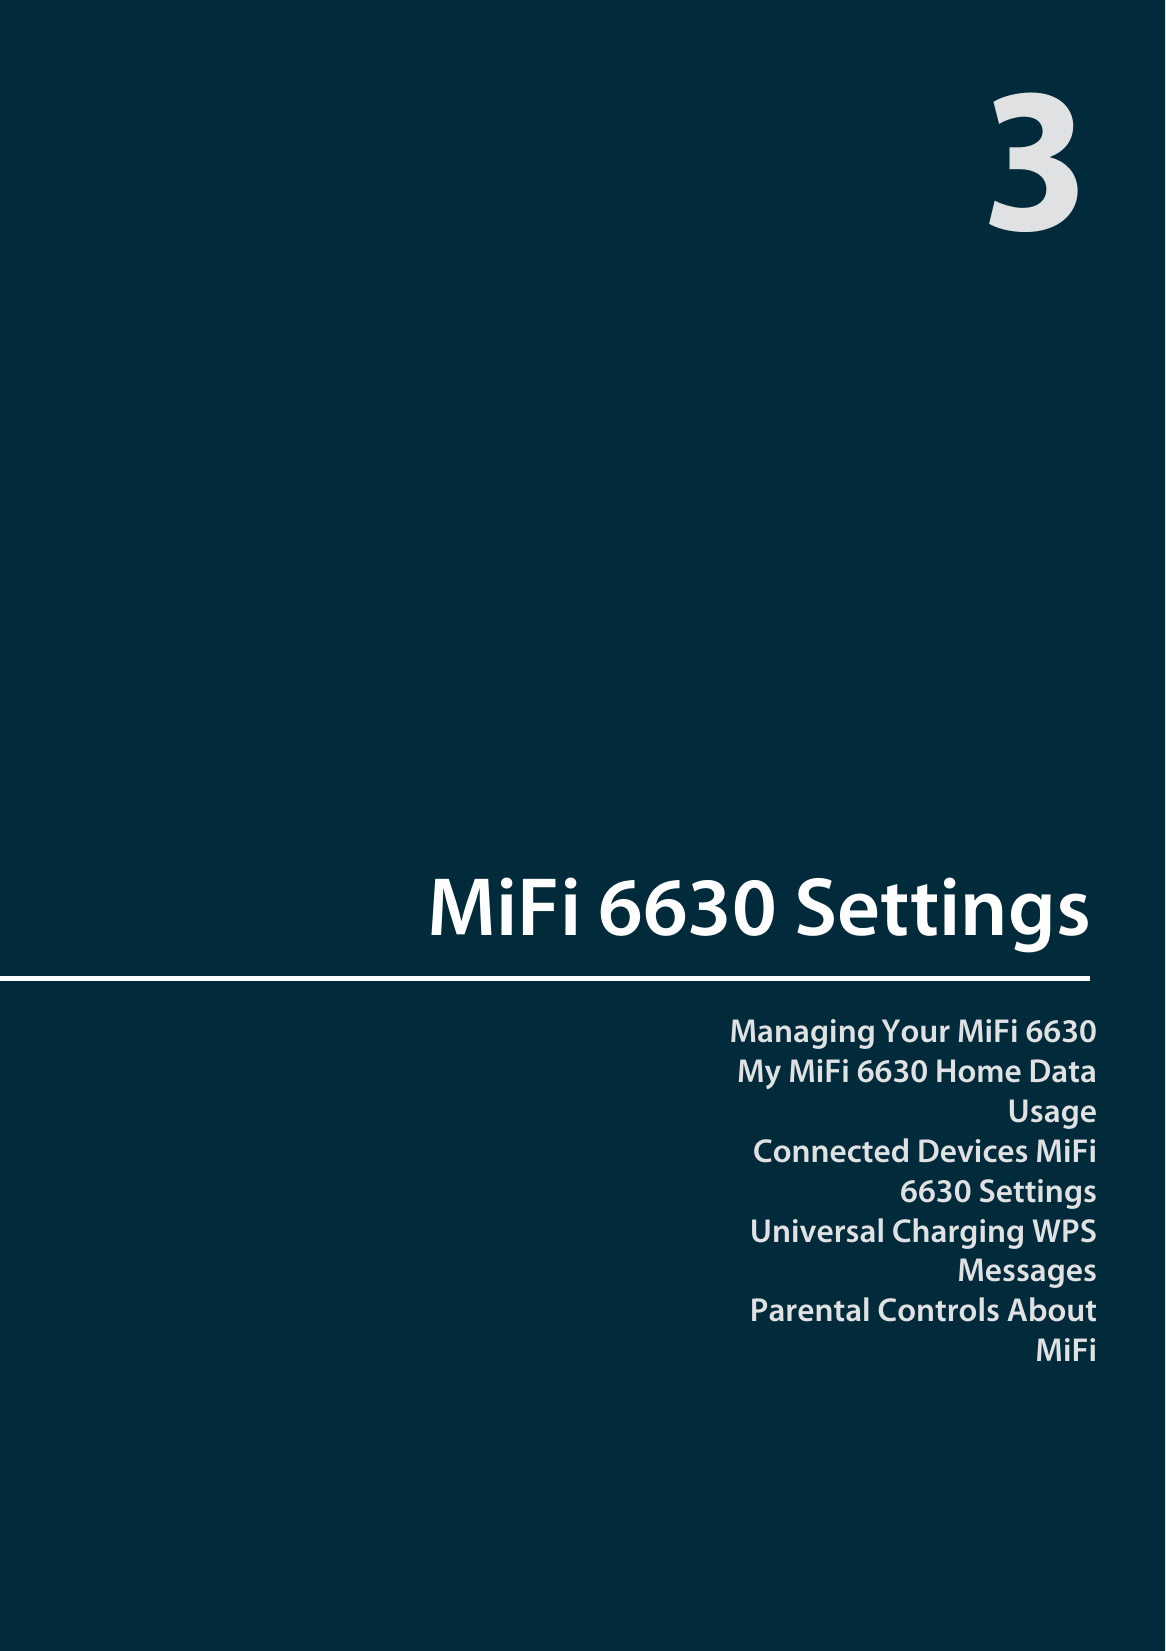 Managing Your MiFi 6630 My MiFi 6630 Home Data UsageConnected Devices MiFi 6630 Settings Universal Charging WPSMessagesParental Controls About MiFiMiFi 6630 Settings3